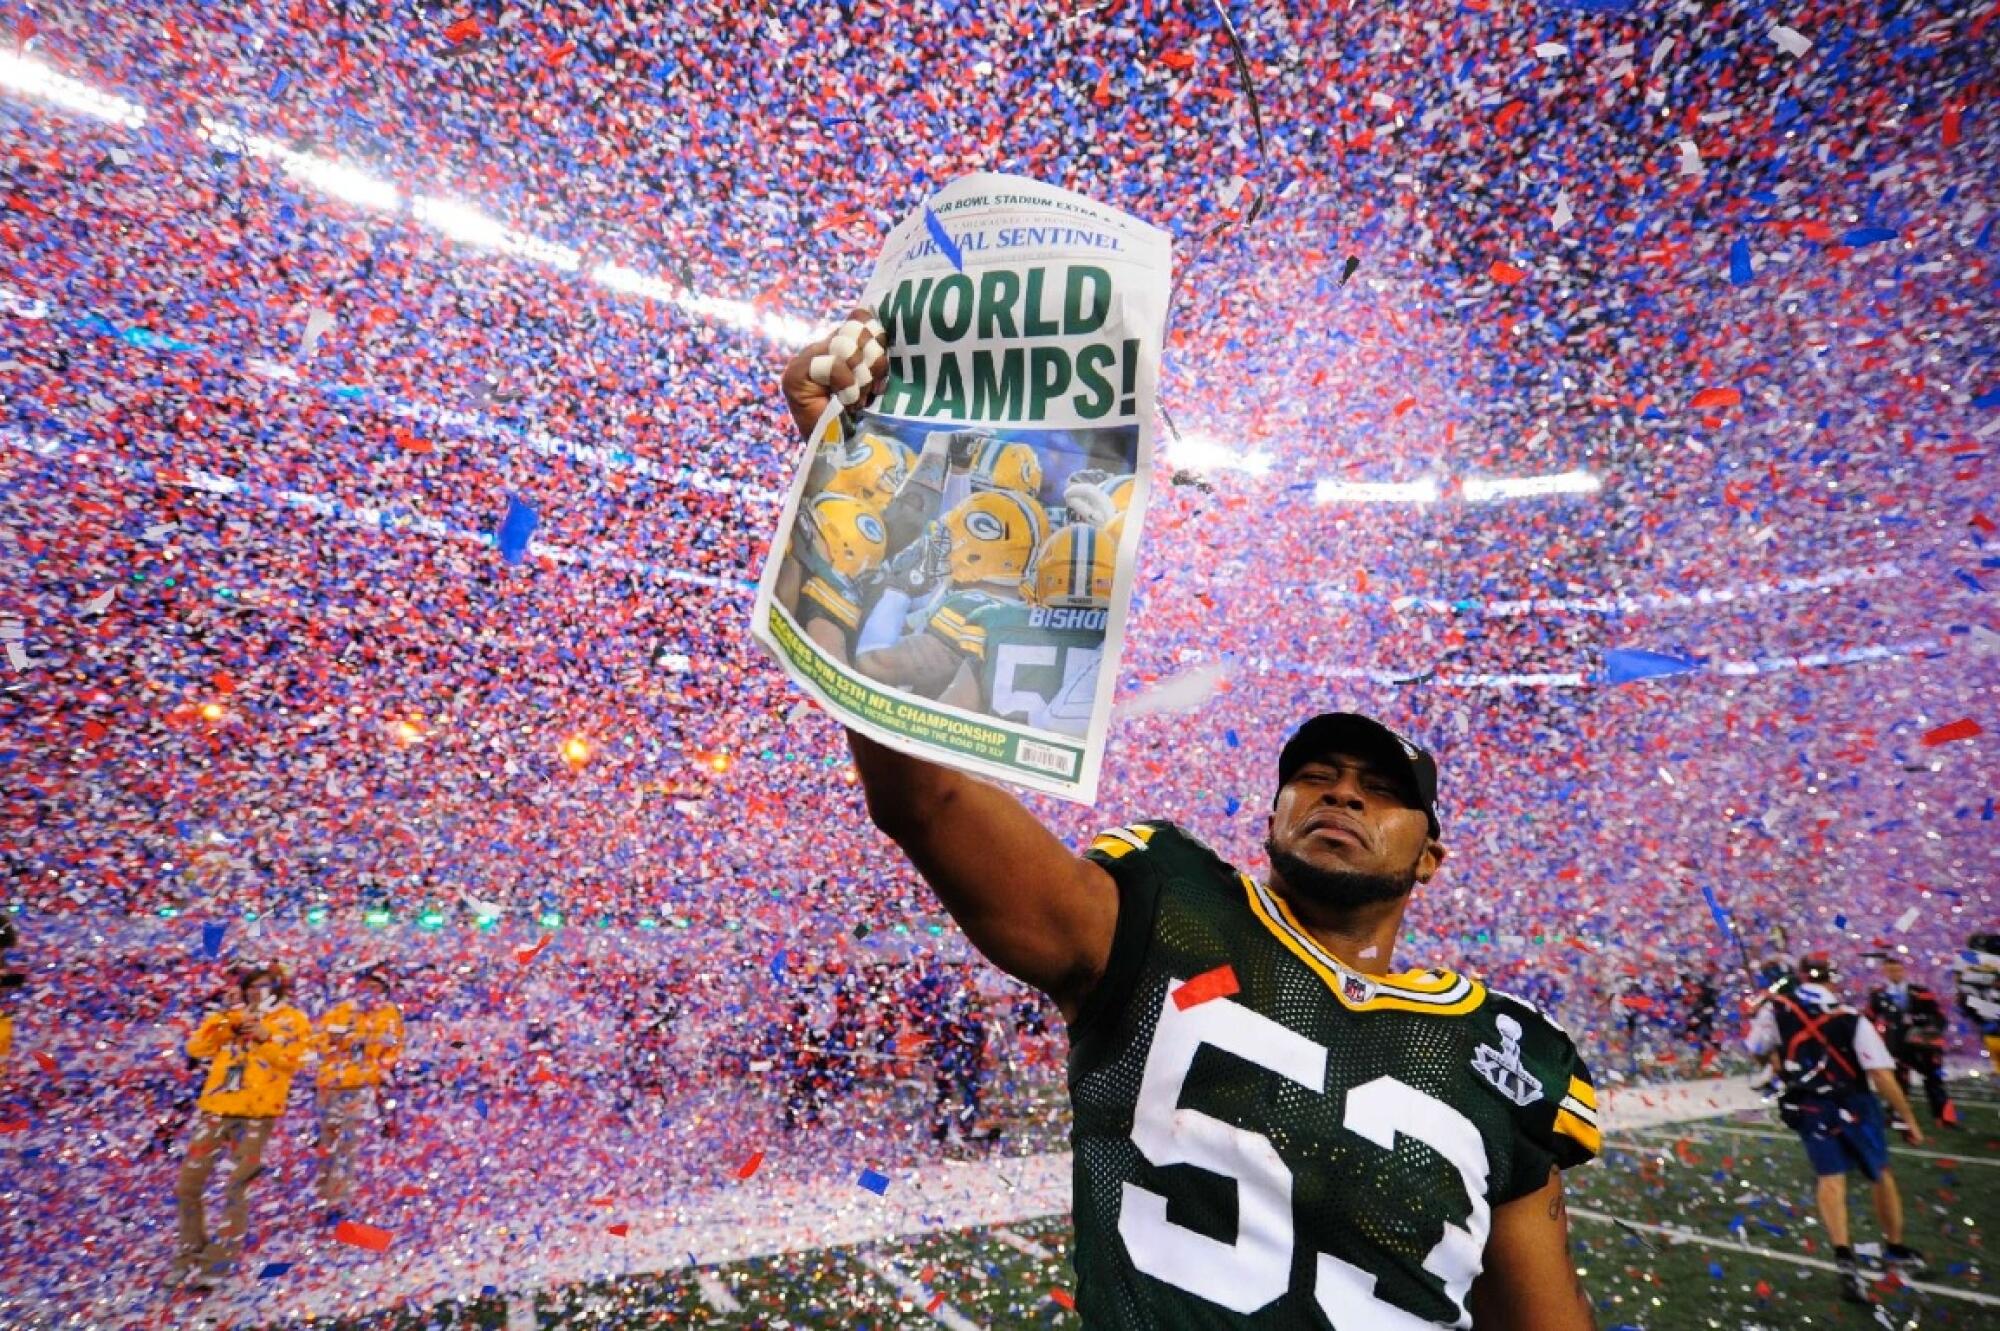 Biever took this photo of Green Bay Packers linebacker Diyral Briggs holding up the Milwaukee Journal 